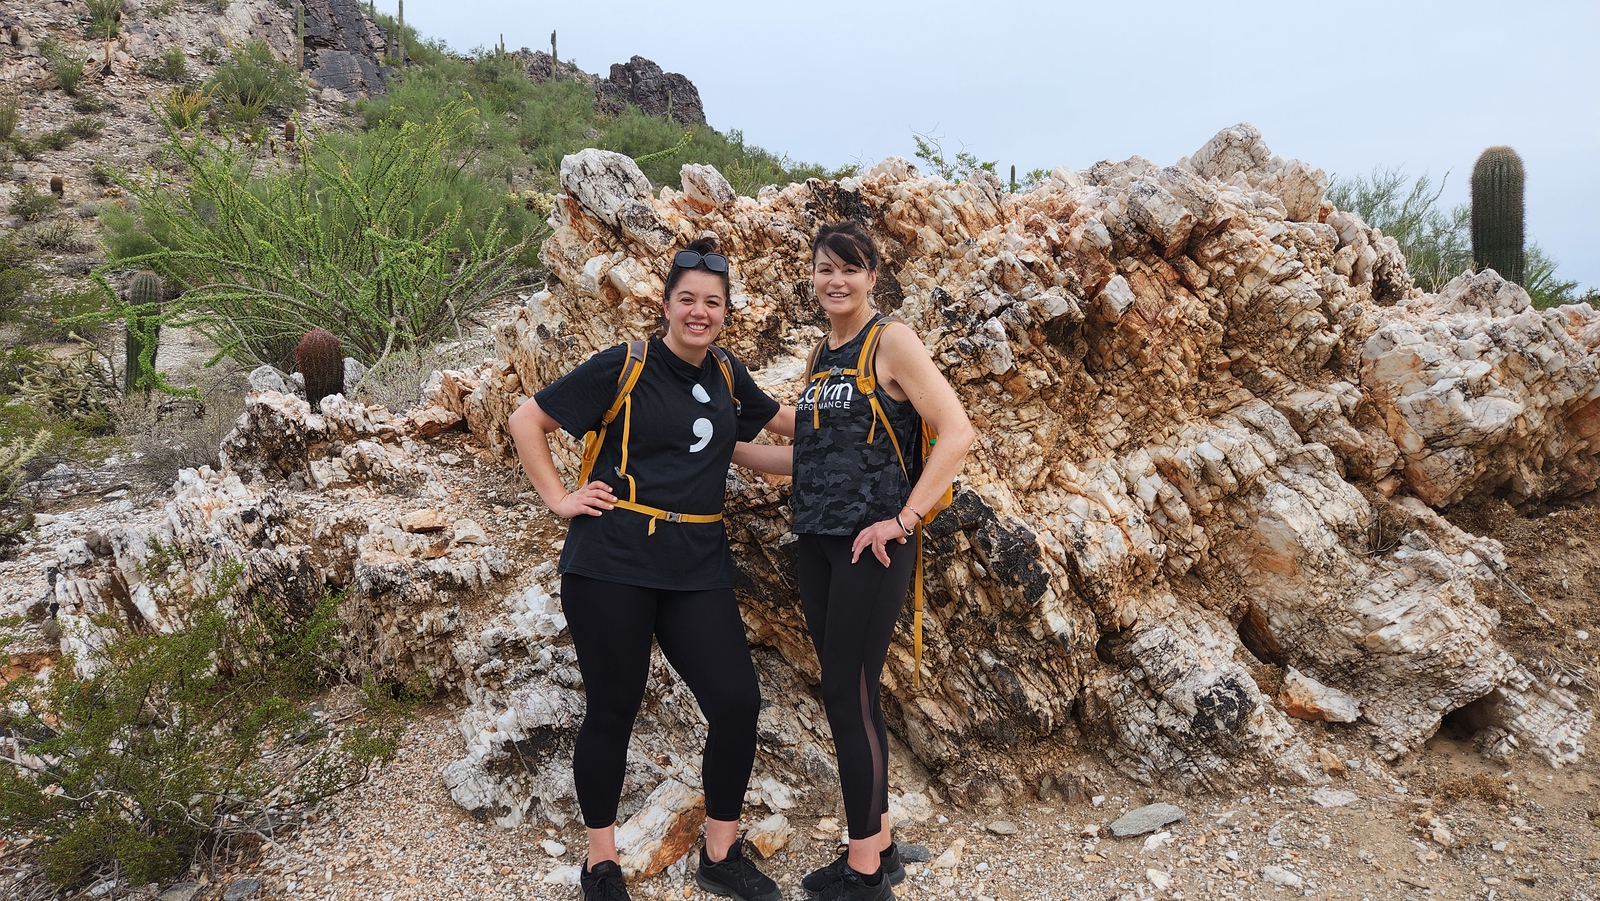 A couple of friends all smiles posing in front of a rock formation during one of the recent Phoenix hiking tours from the Wild Bunch.